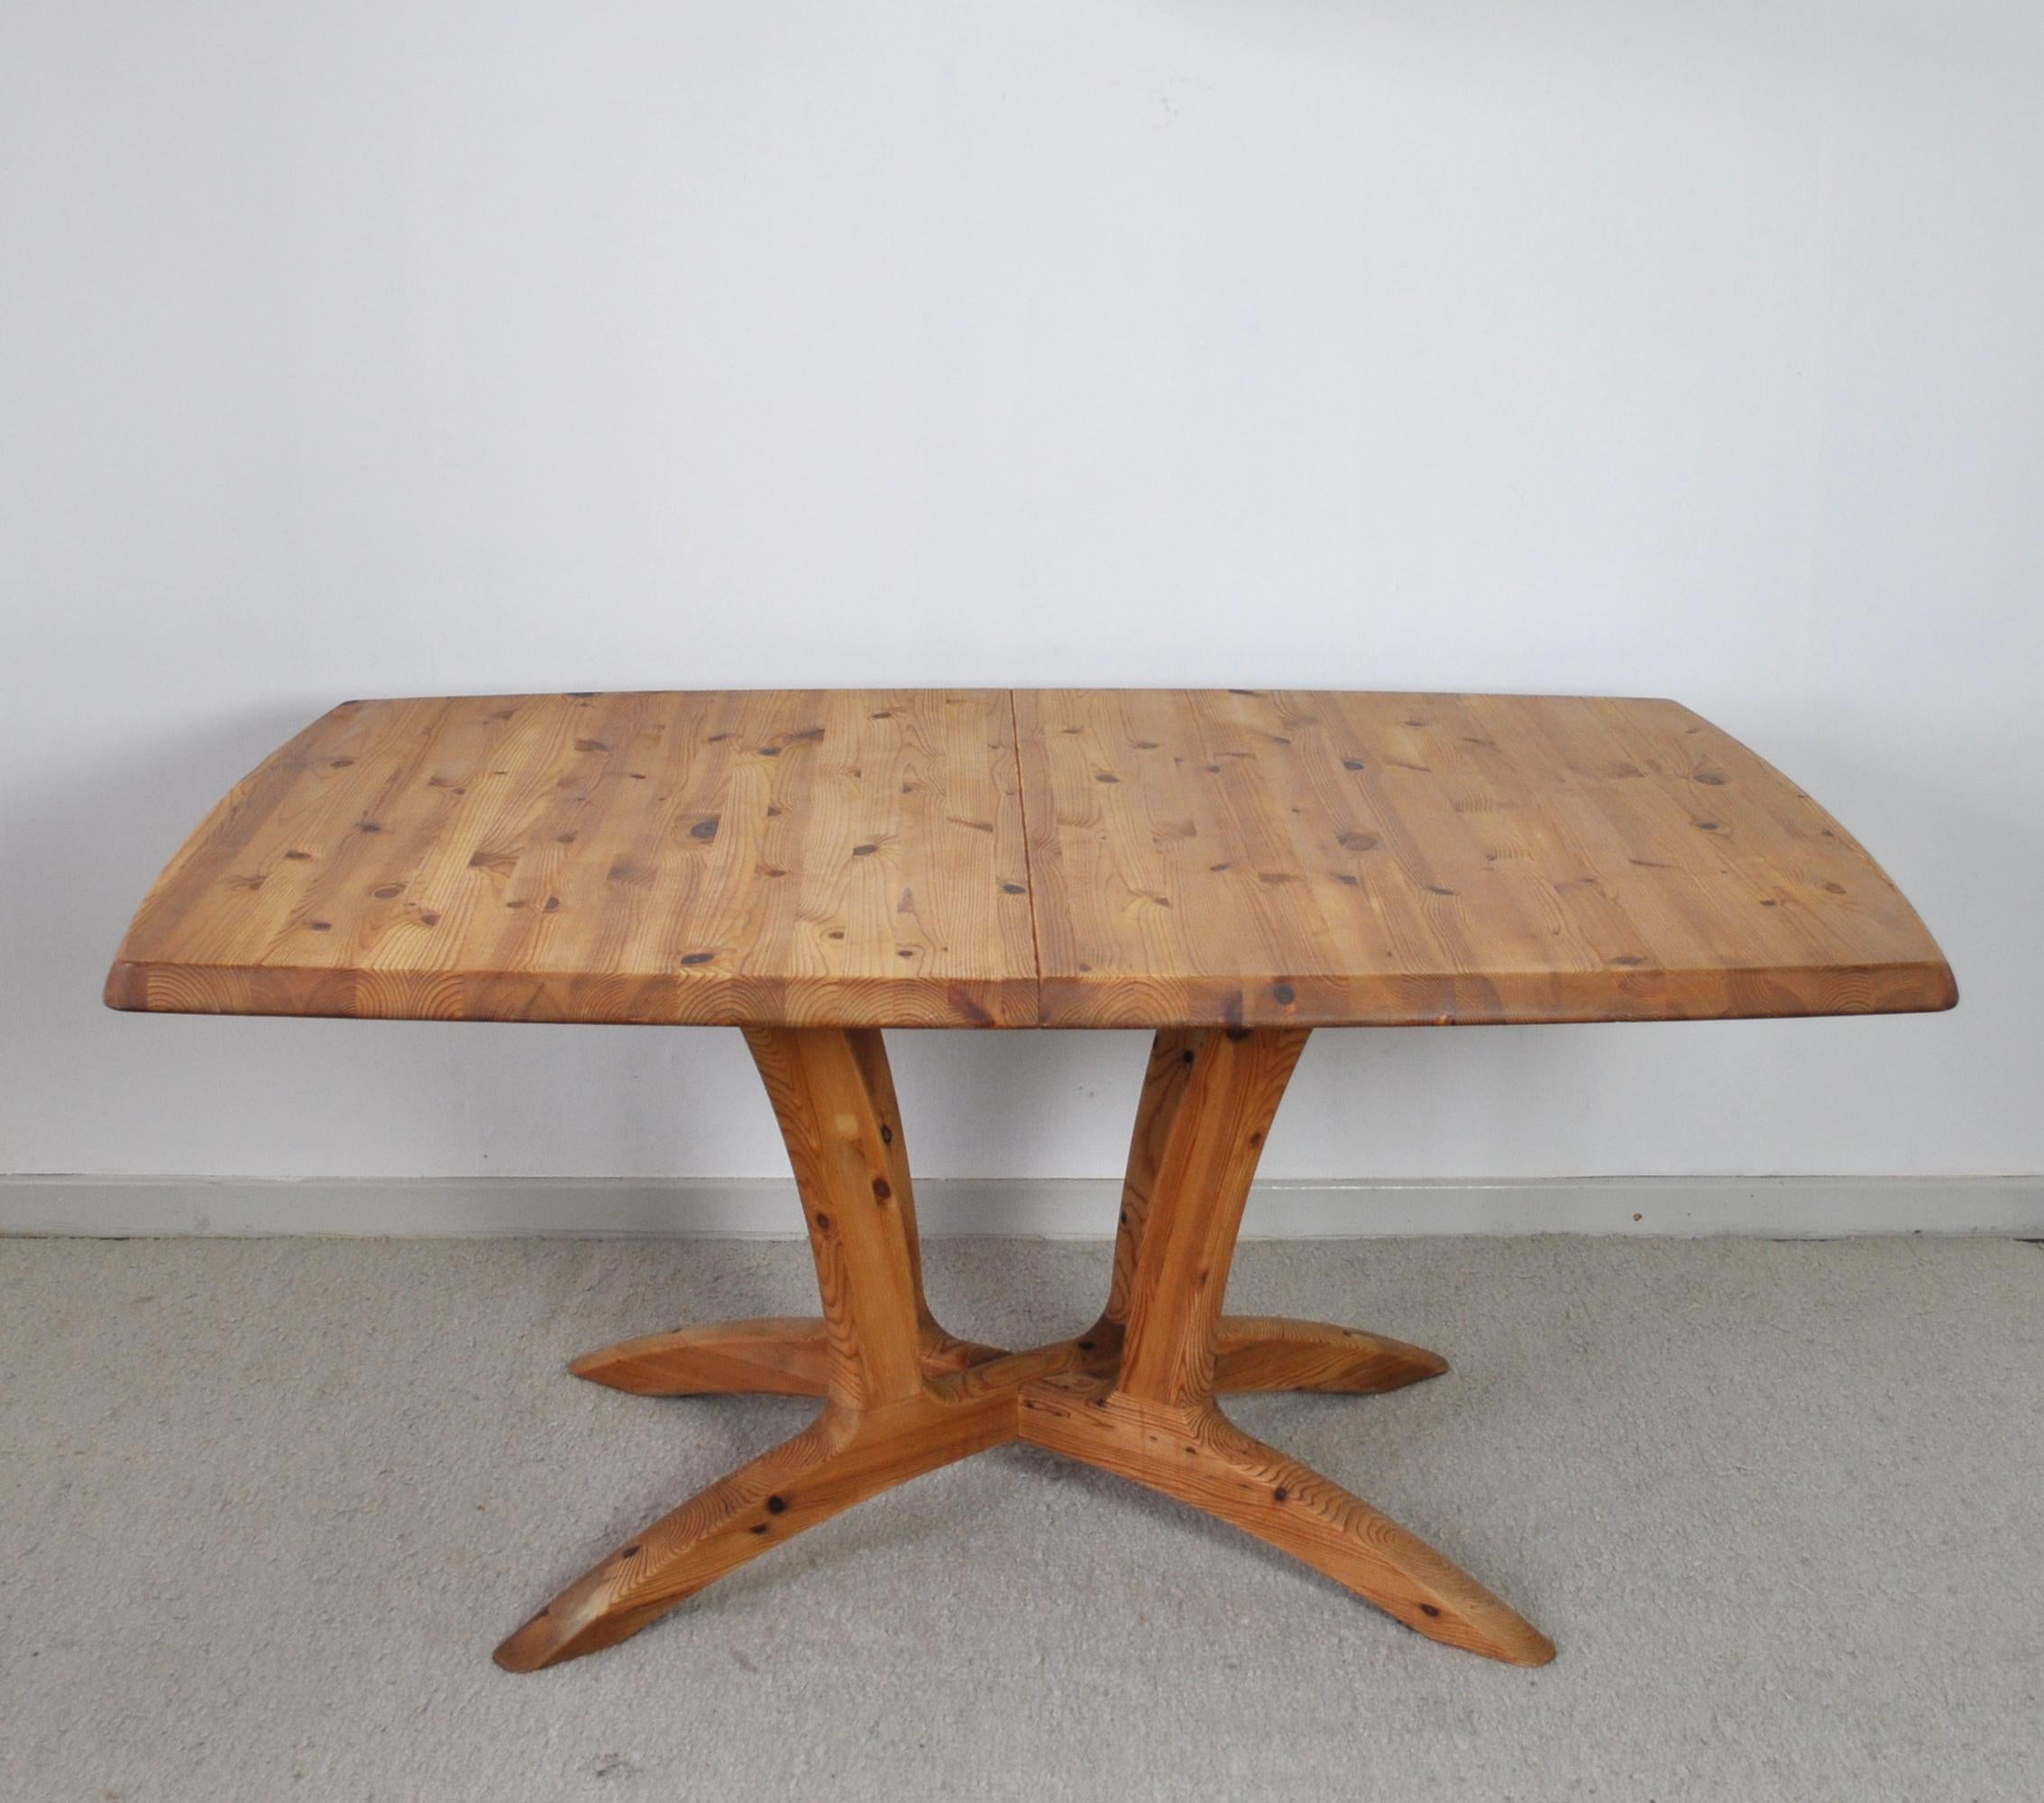 Scandinavian Large Extendable Pine Dining Table In Good Condition For Sale In Vordingborg, DK